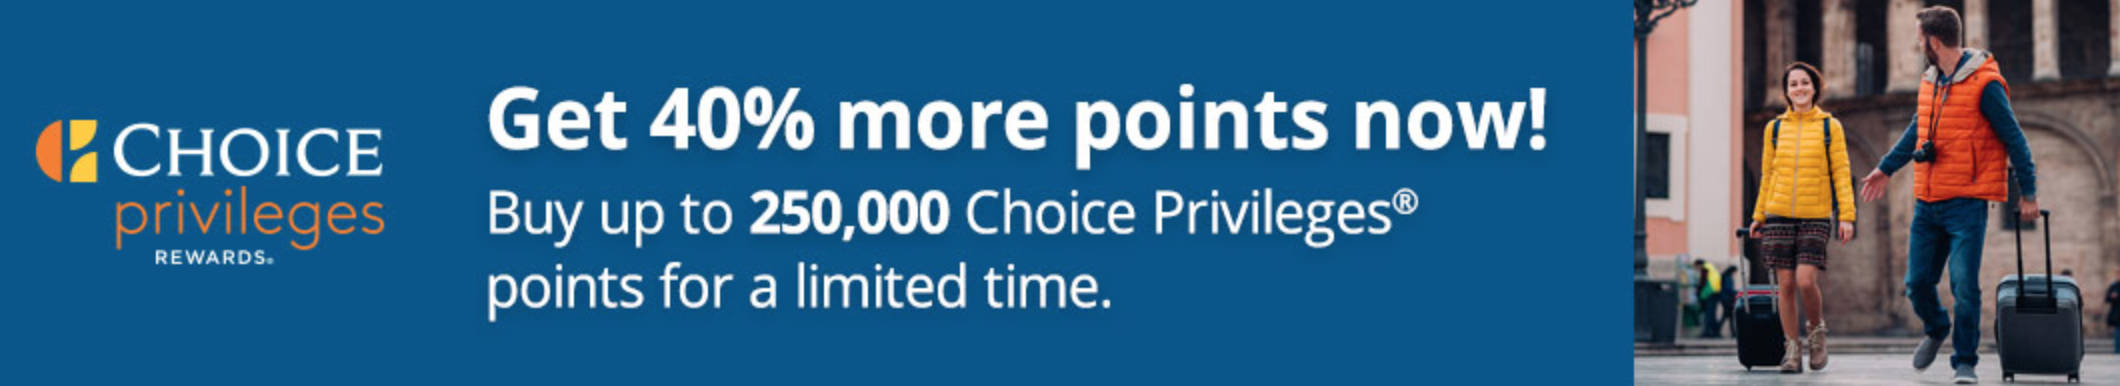 choice hotels black friday will allow you to purchase choice points with a 40% bonus